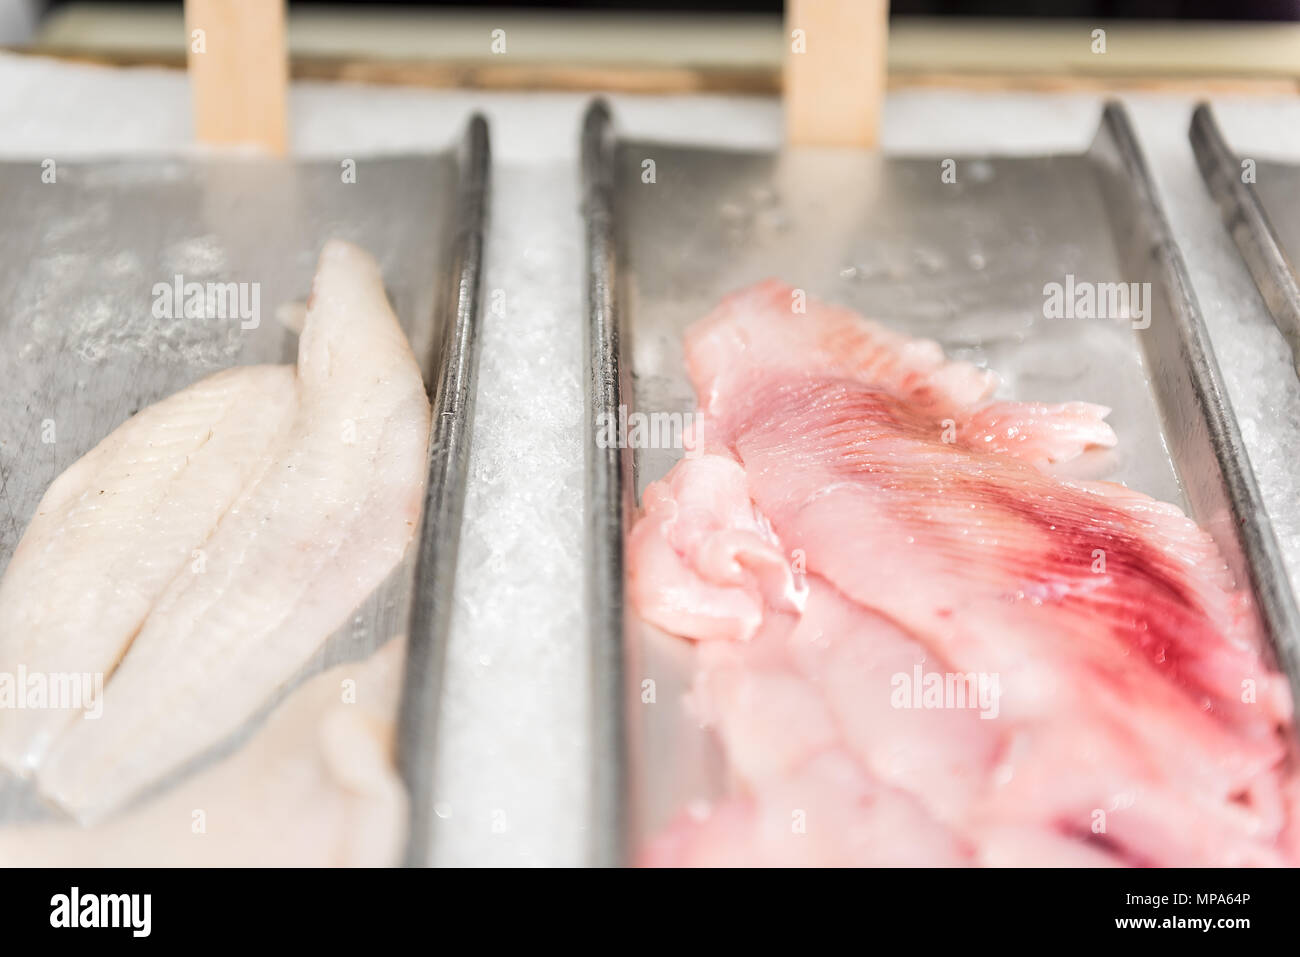 https://c8.alamy.com/comp/MPA64P/closeup-of-many-fresh-sole-fish-fillets-pink-meat-raw-scales-skin-in-seafood-market-shop-display-tray-MPA64P.jpg